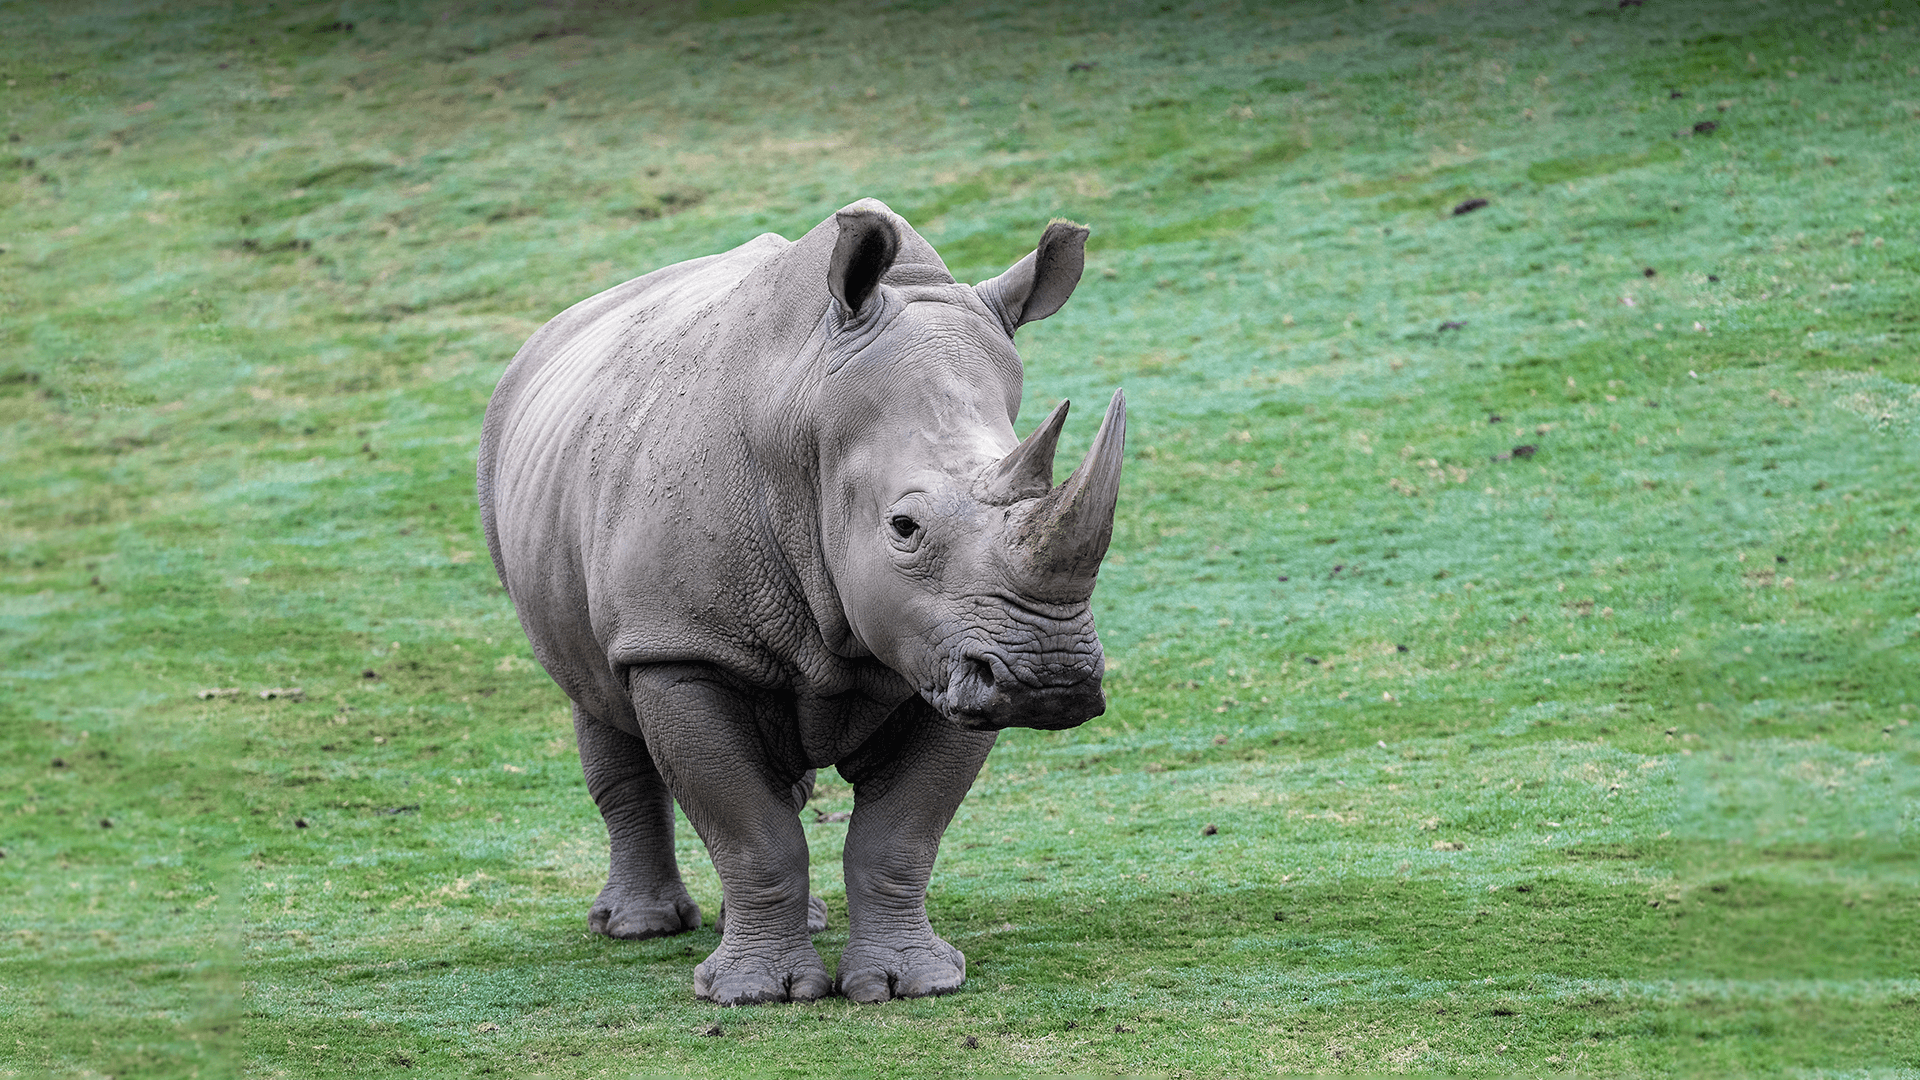 A southern white rhino stands in a grass field and looks slightly to the right.